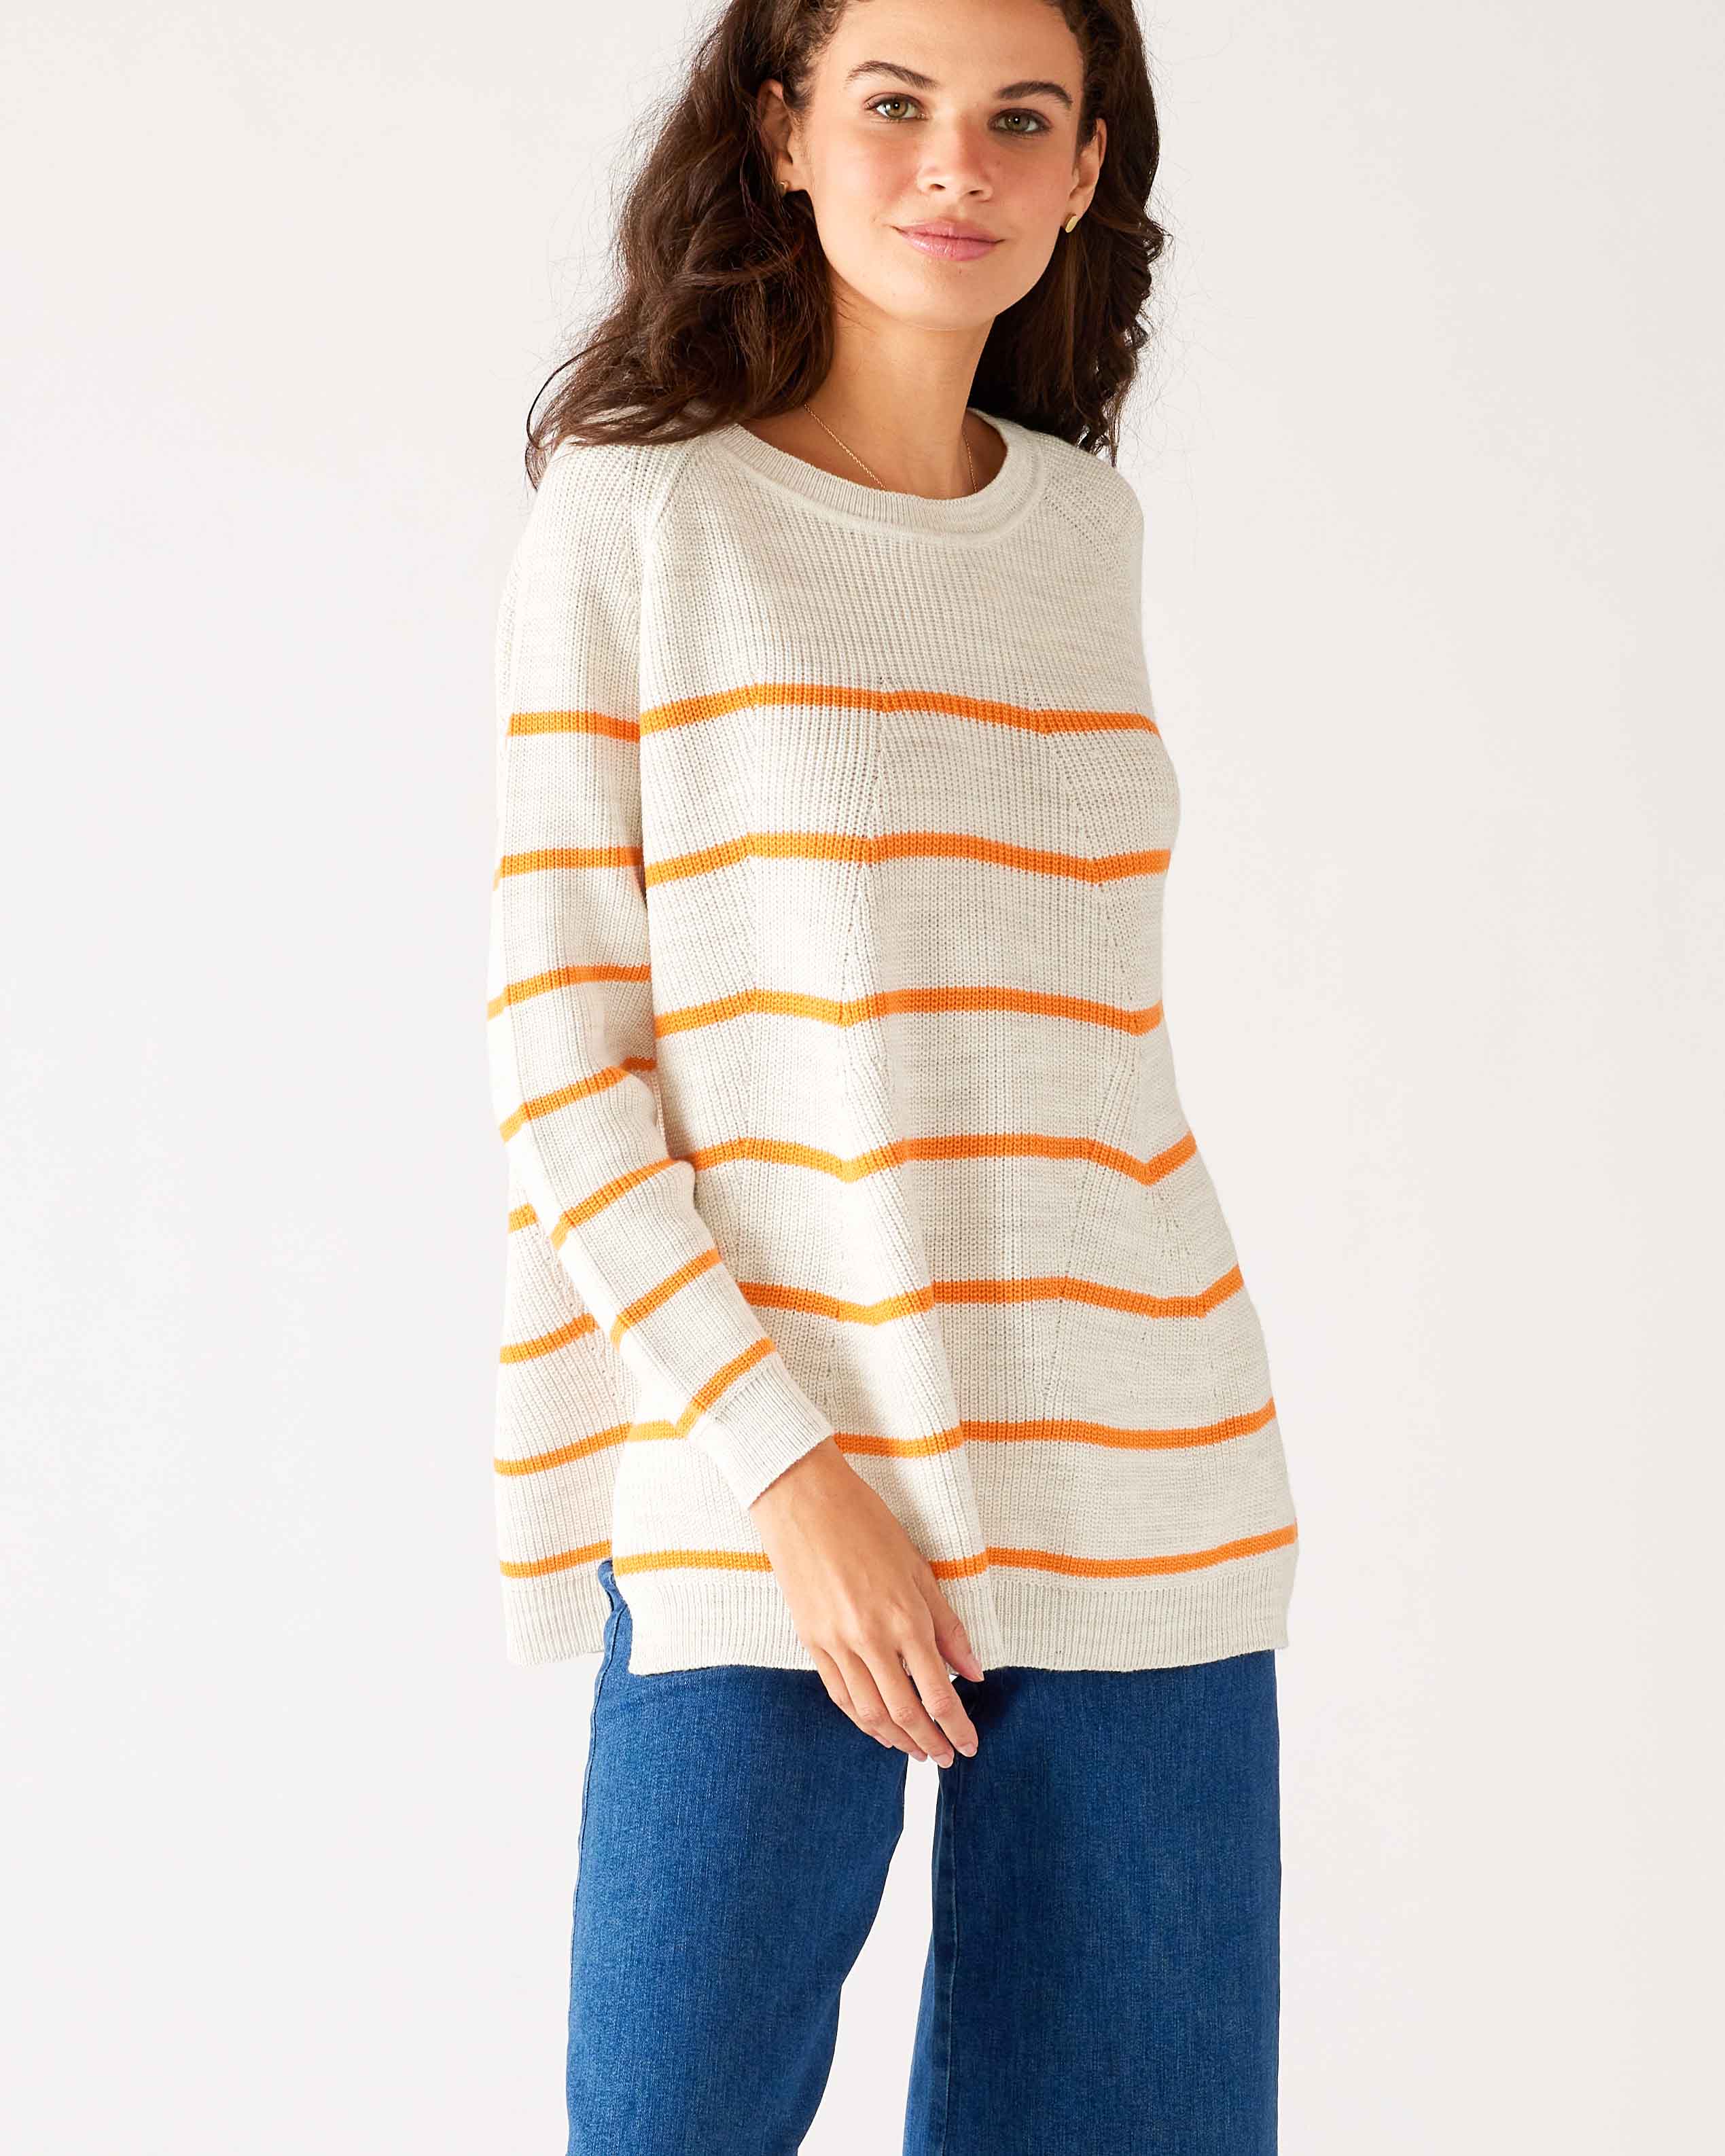 Womens White and Orange Striped Midweight Sweater Front View